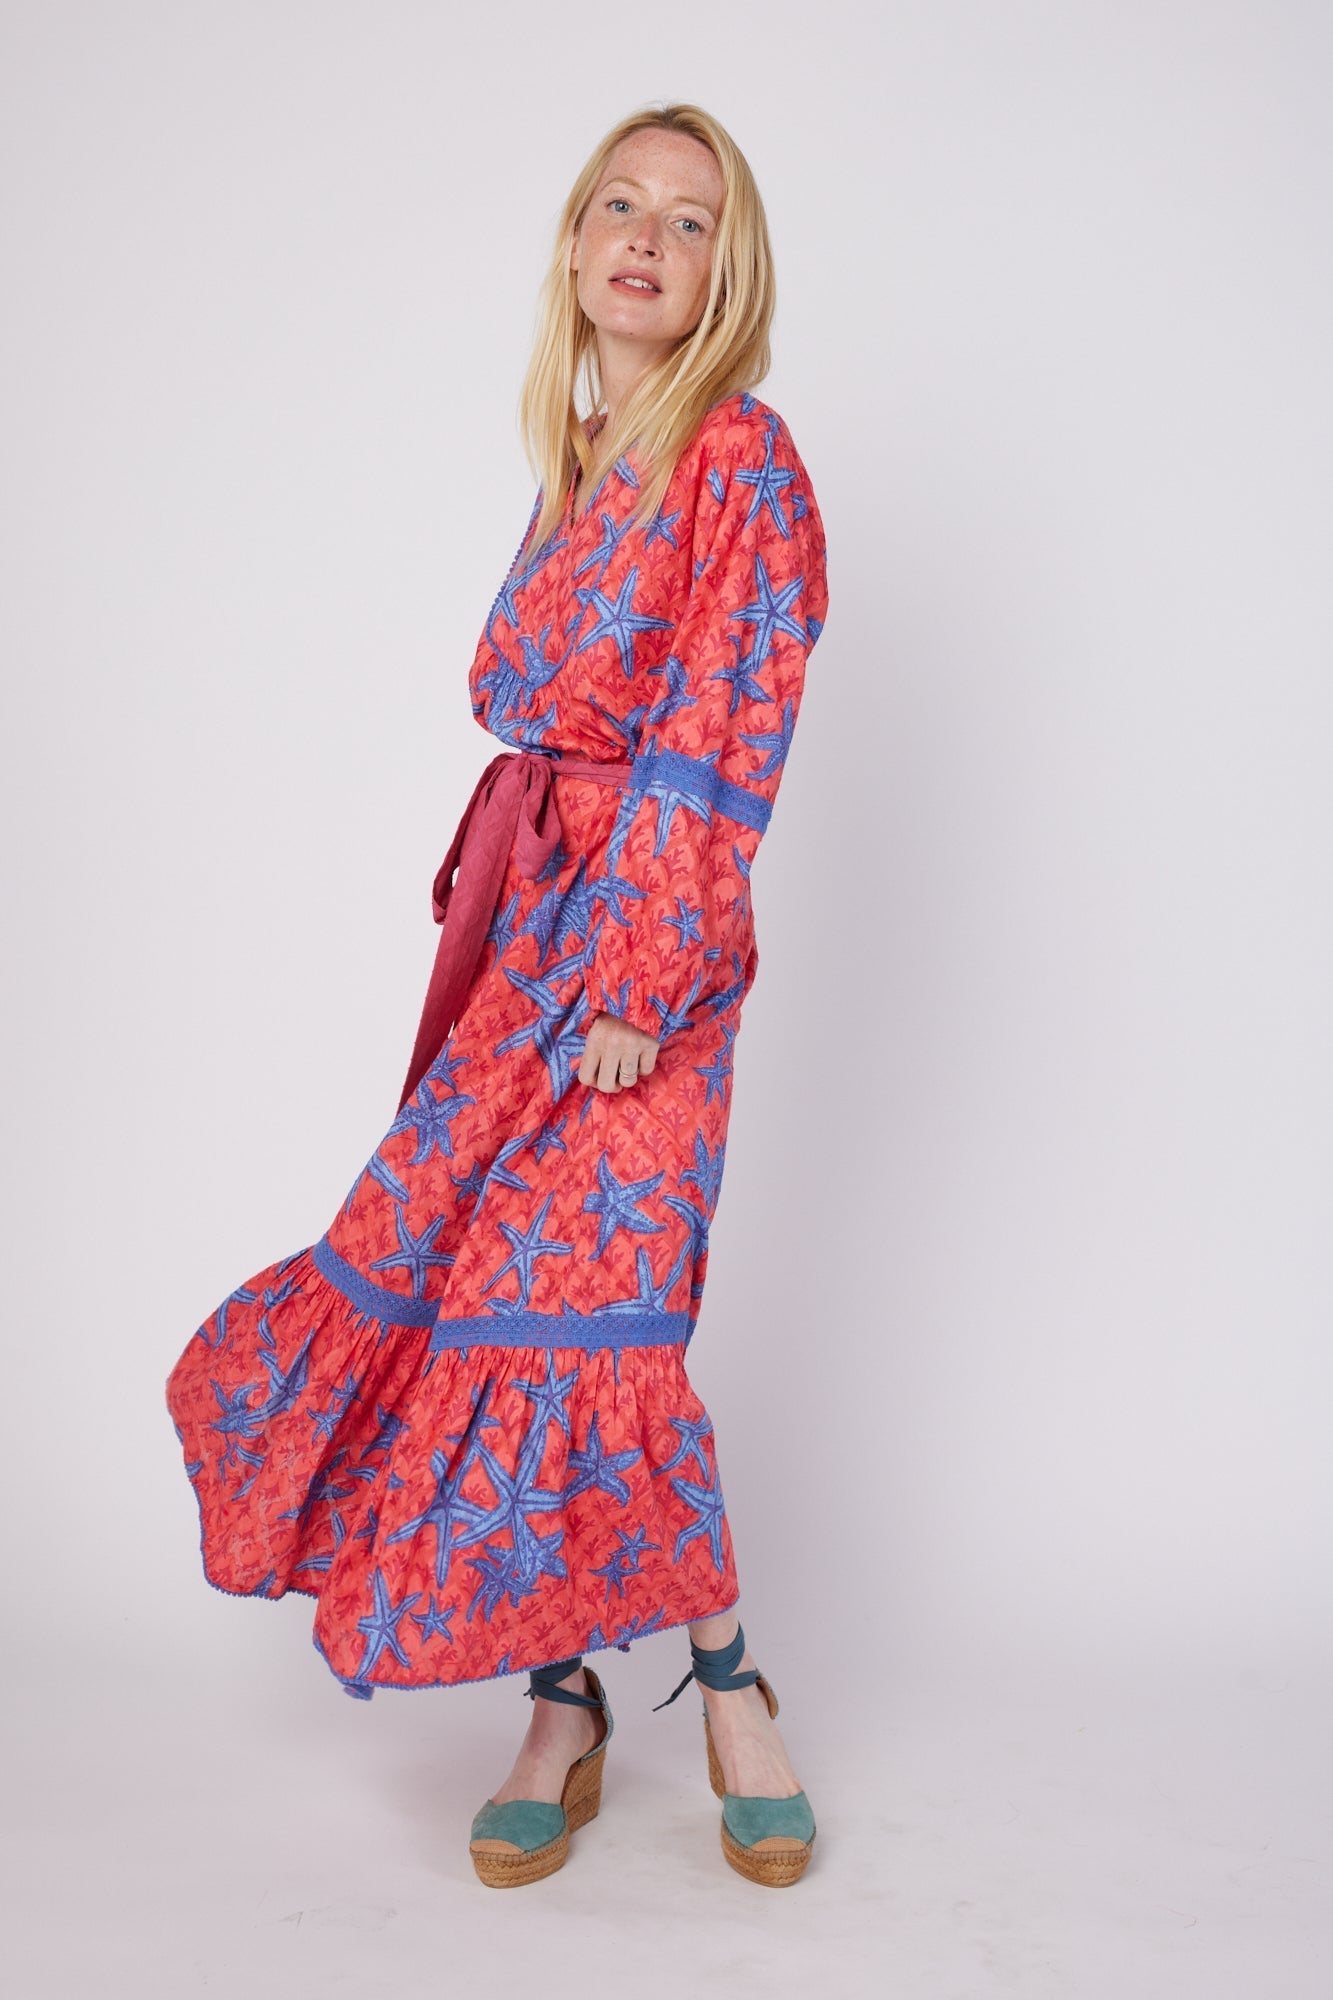 ModaPosa Ilaria Puff Sleeve Embroidered Maxi Dress with Lace Trim in Starfish Scales . Discover women's resort dresses and lifestyle clothing inspired by the Mediterranean. Free worldwide shipping available!